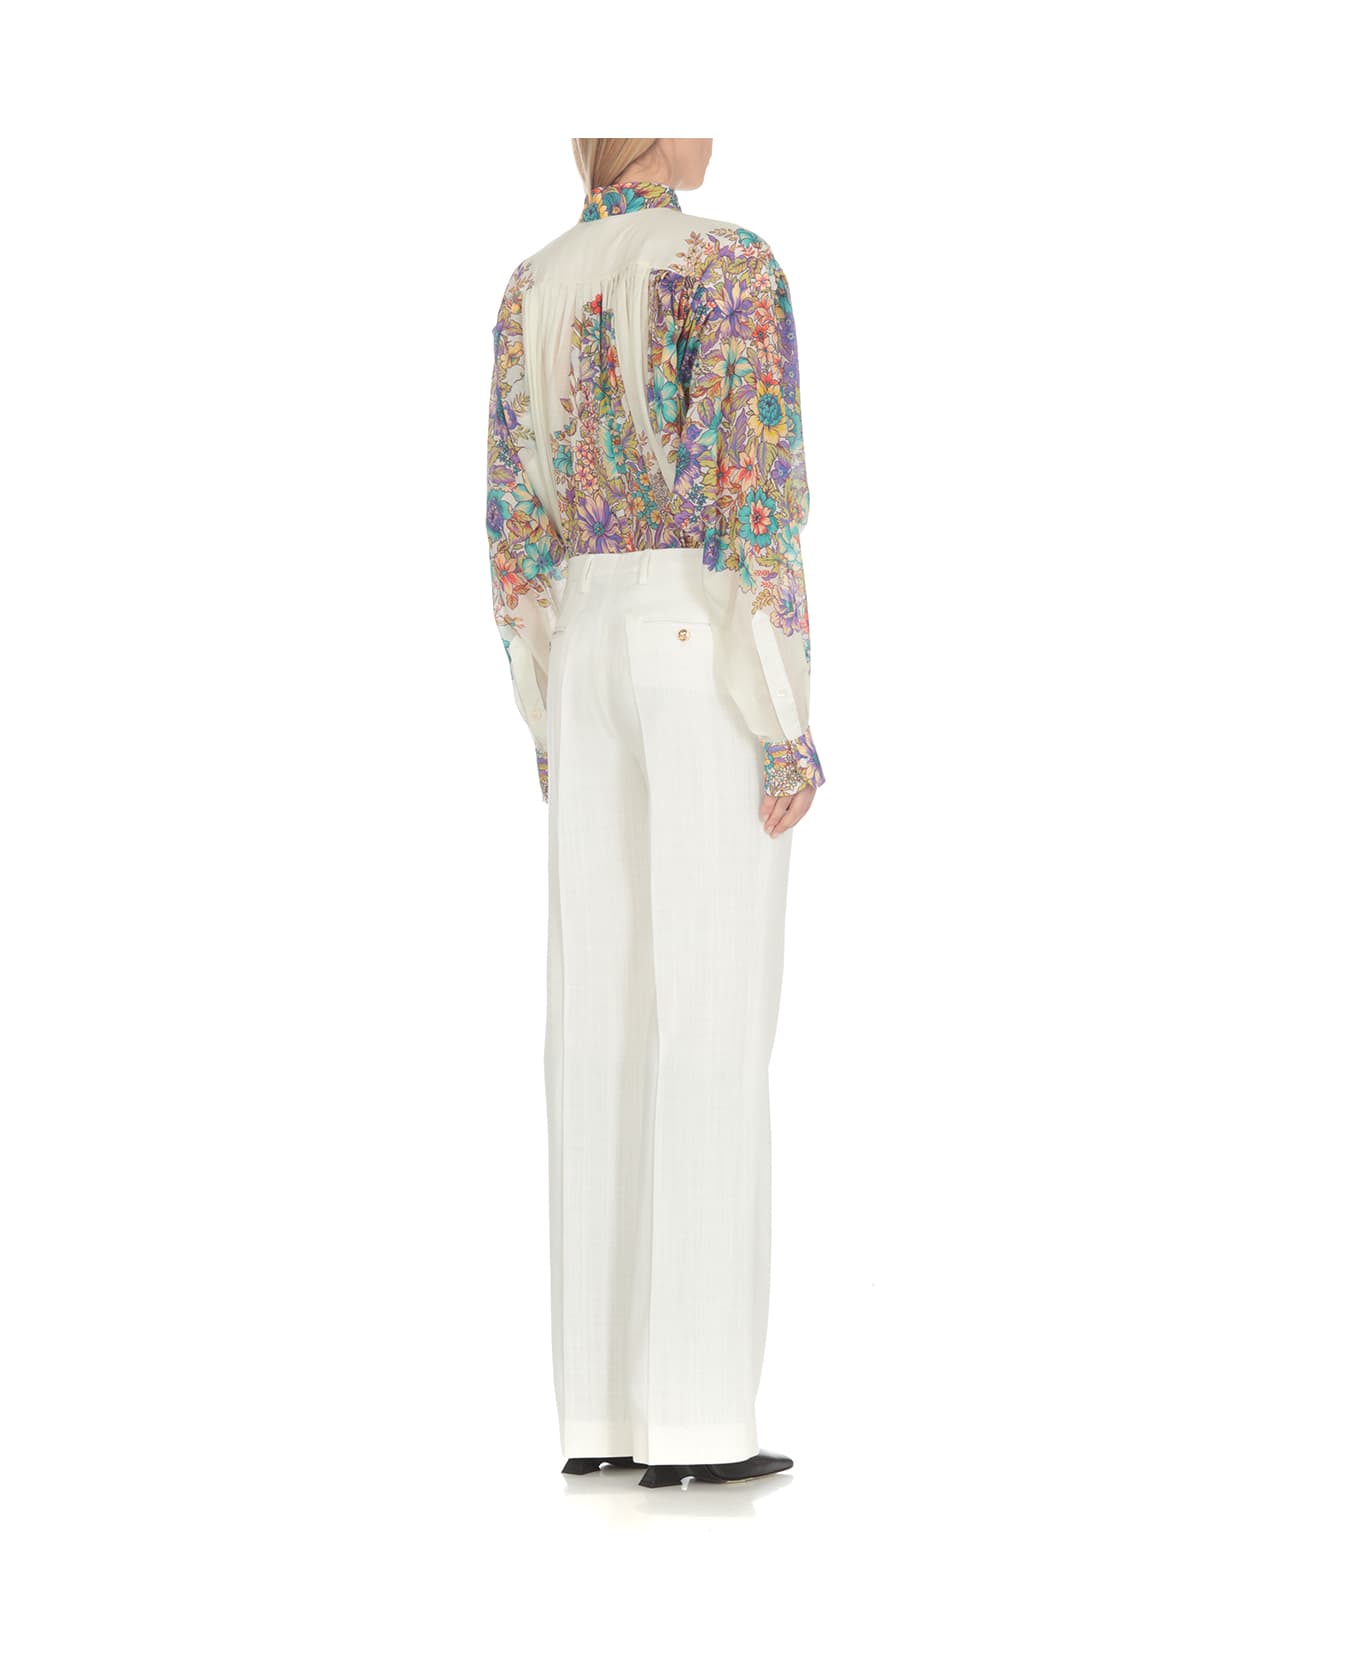 Etro Trousers Trousers - Ivory ボトムス